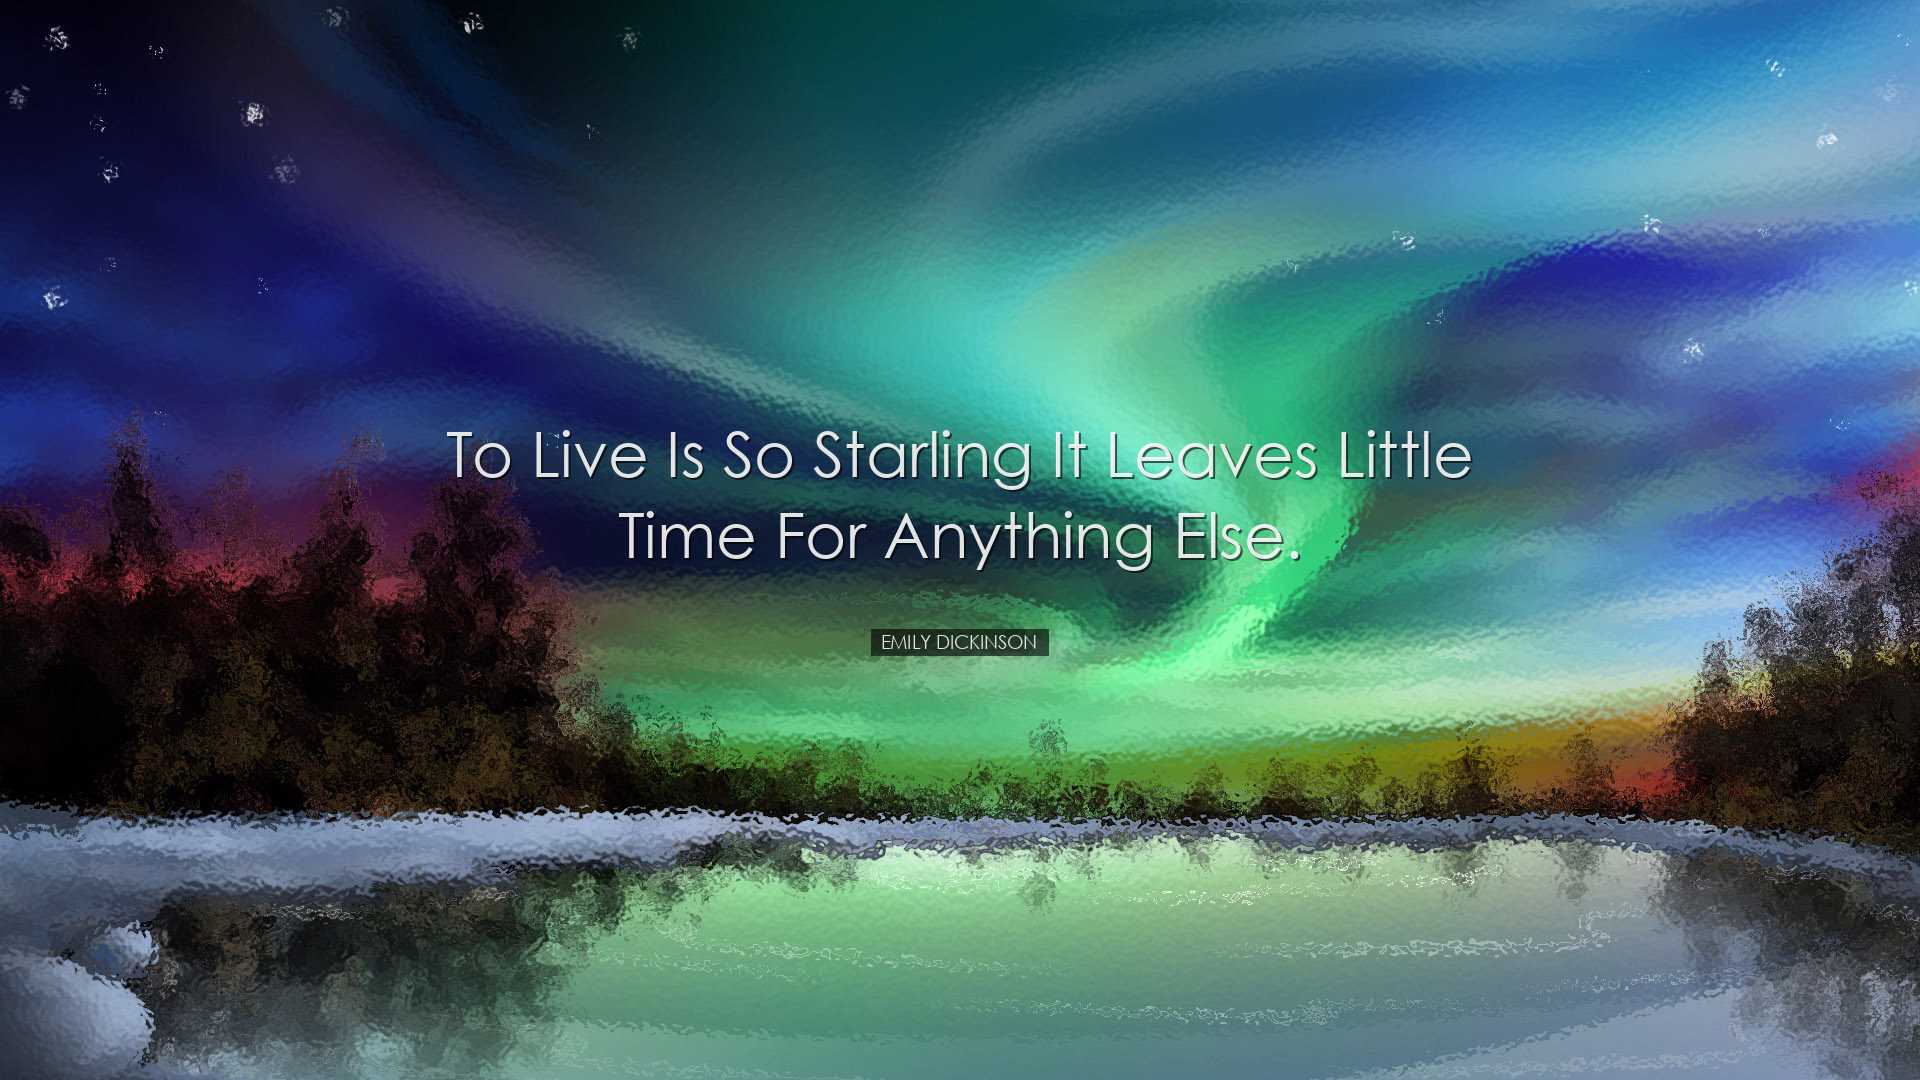 To live is so starling it leaves little time for anything else. -